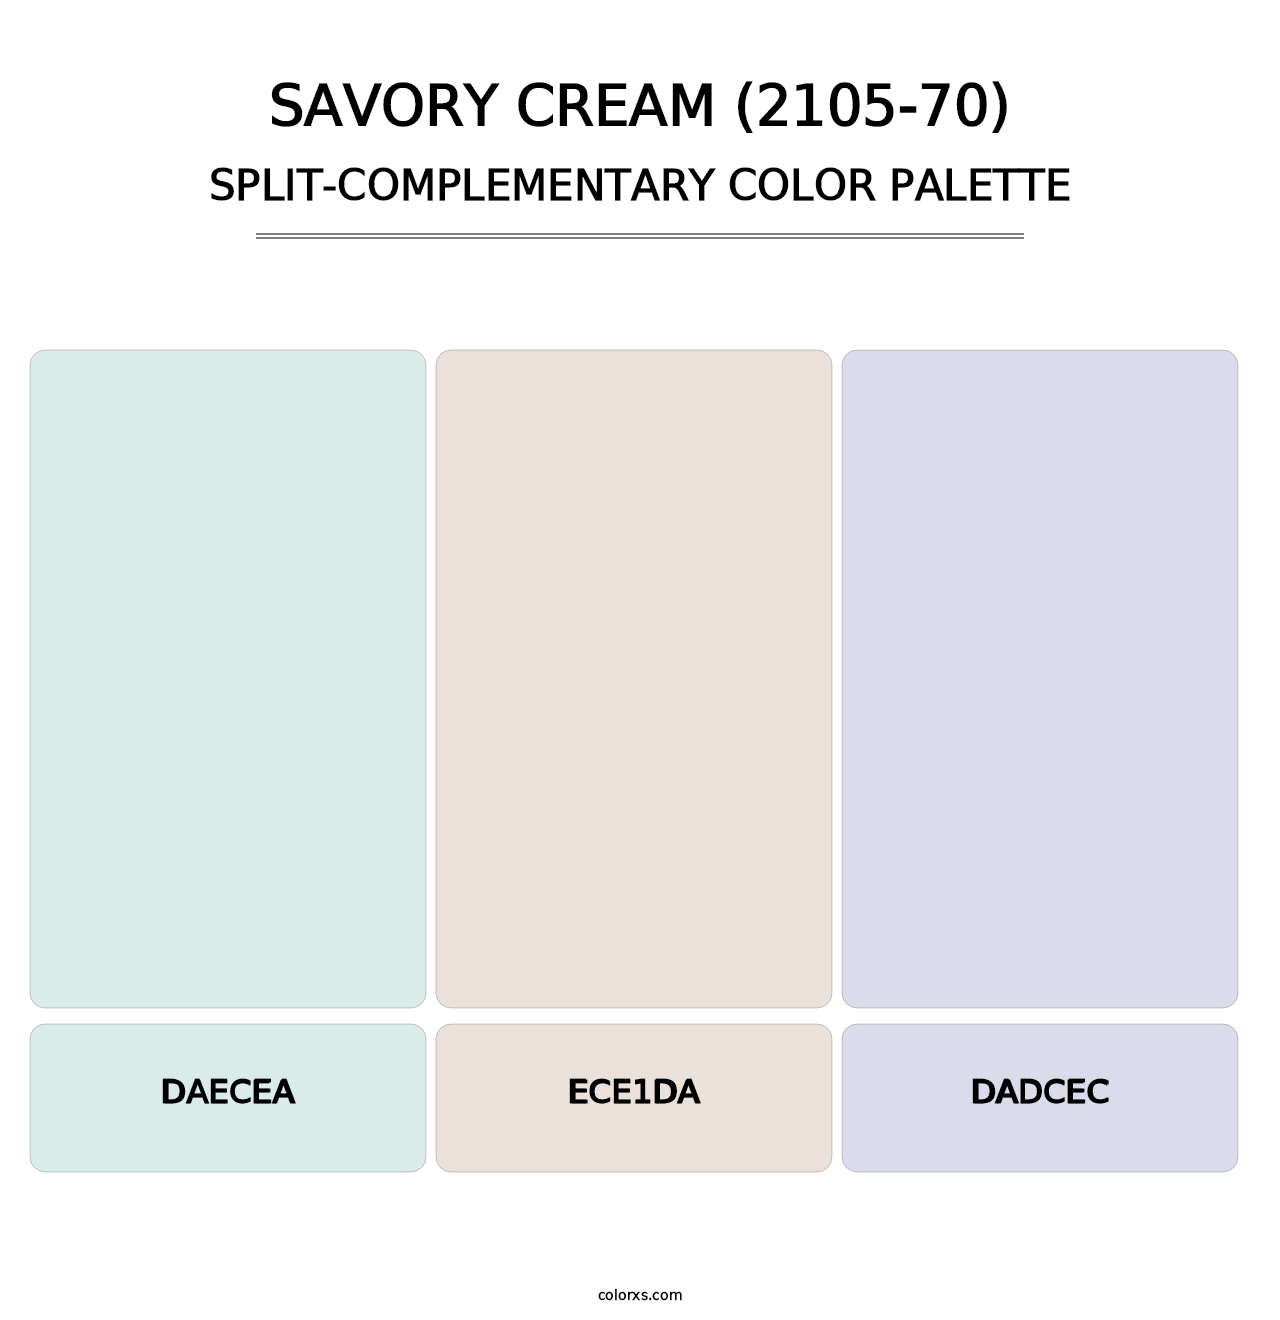 Savory Cream (2105-70) - Split-Complementary Color Palette